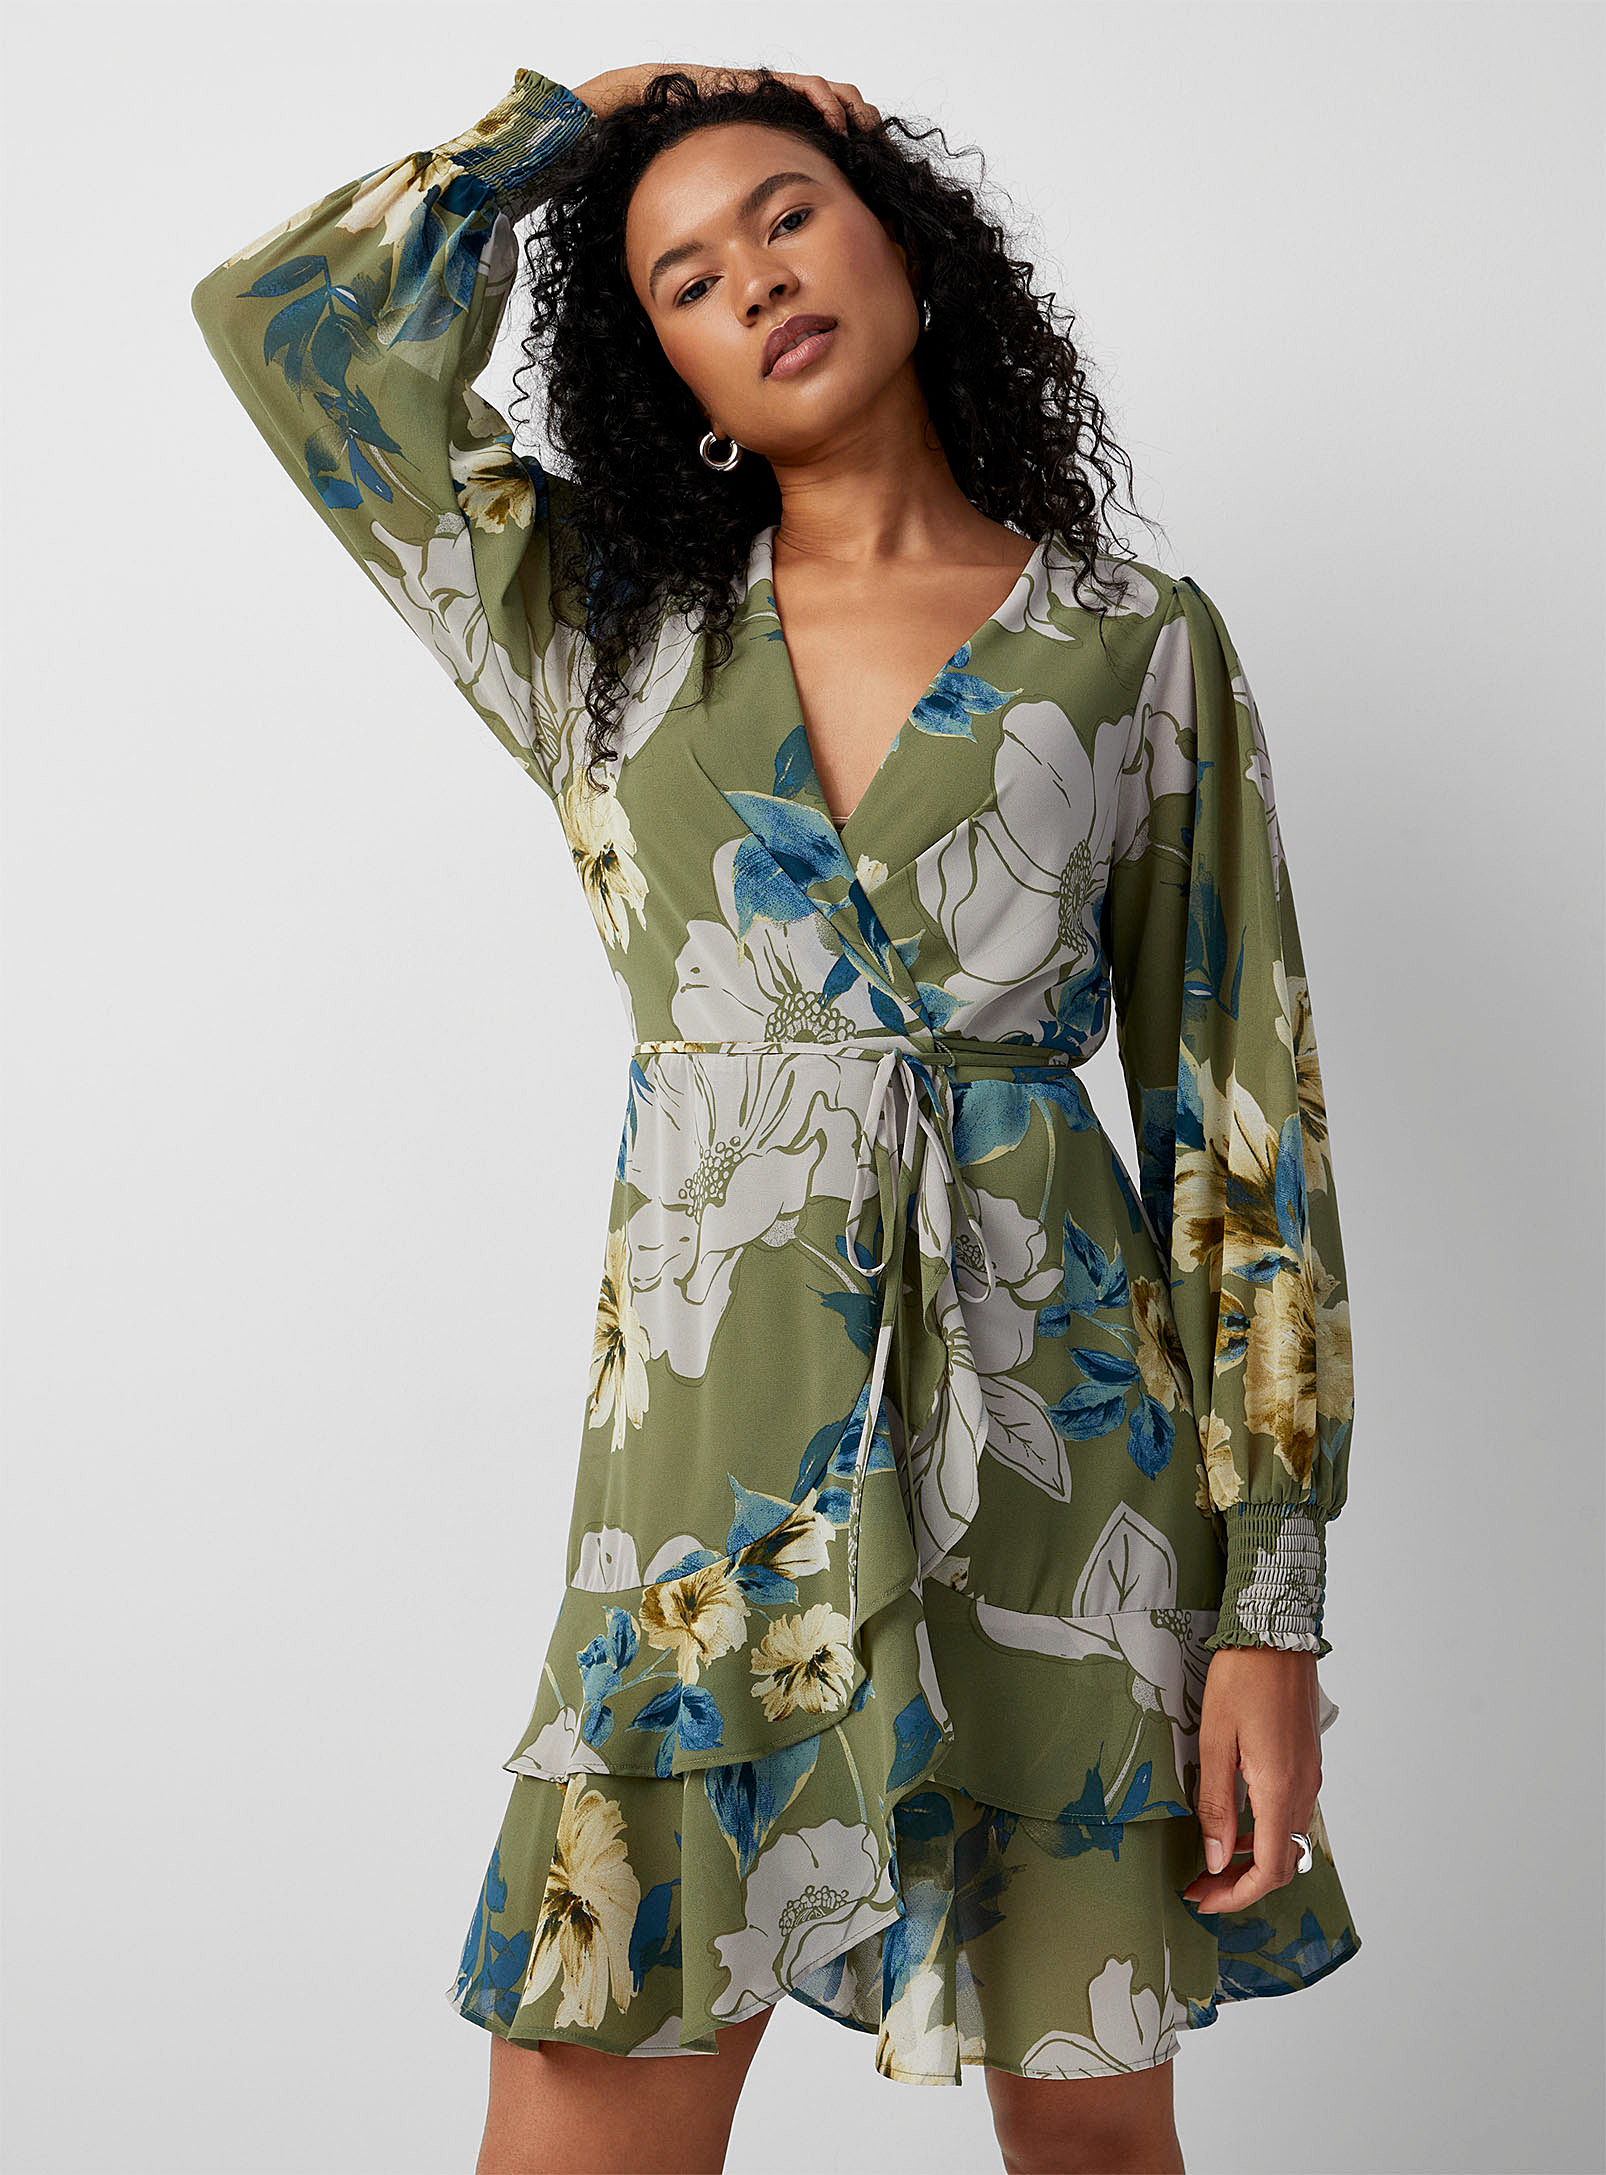 Contemporaine Ruffled Luxurious Wraparound Dress In Patterned Green